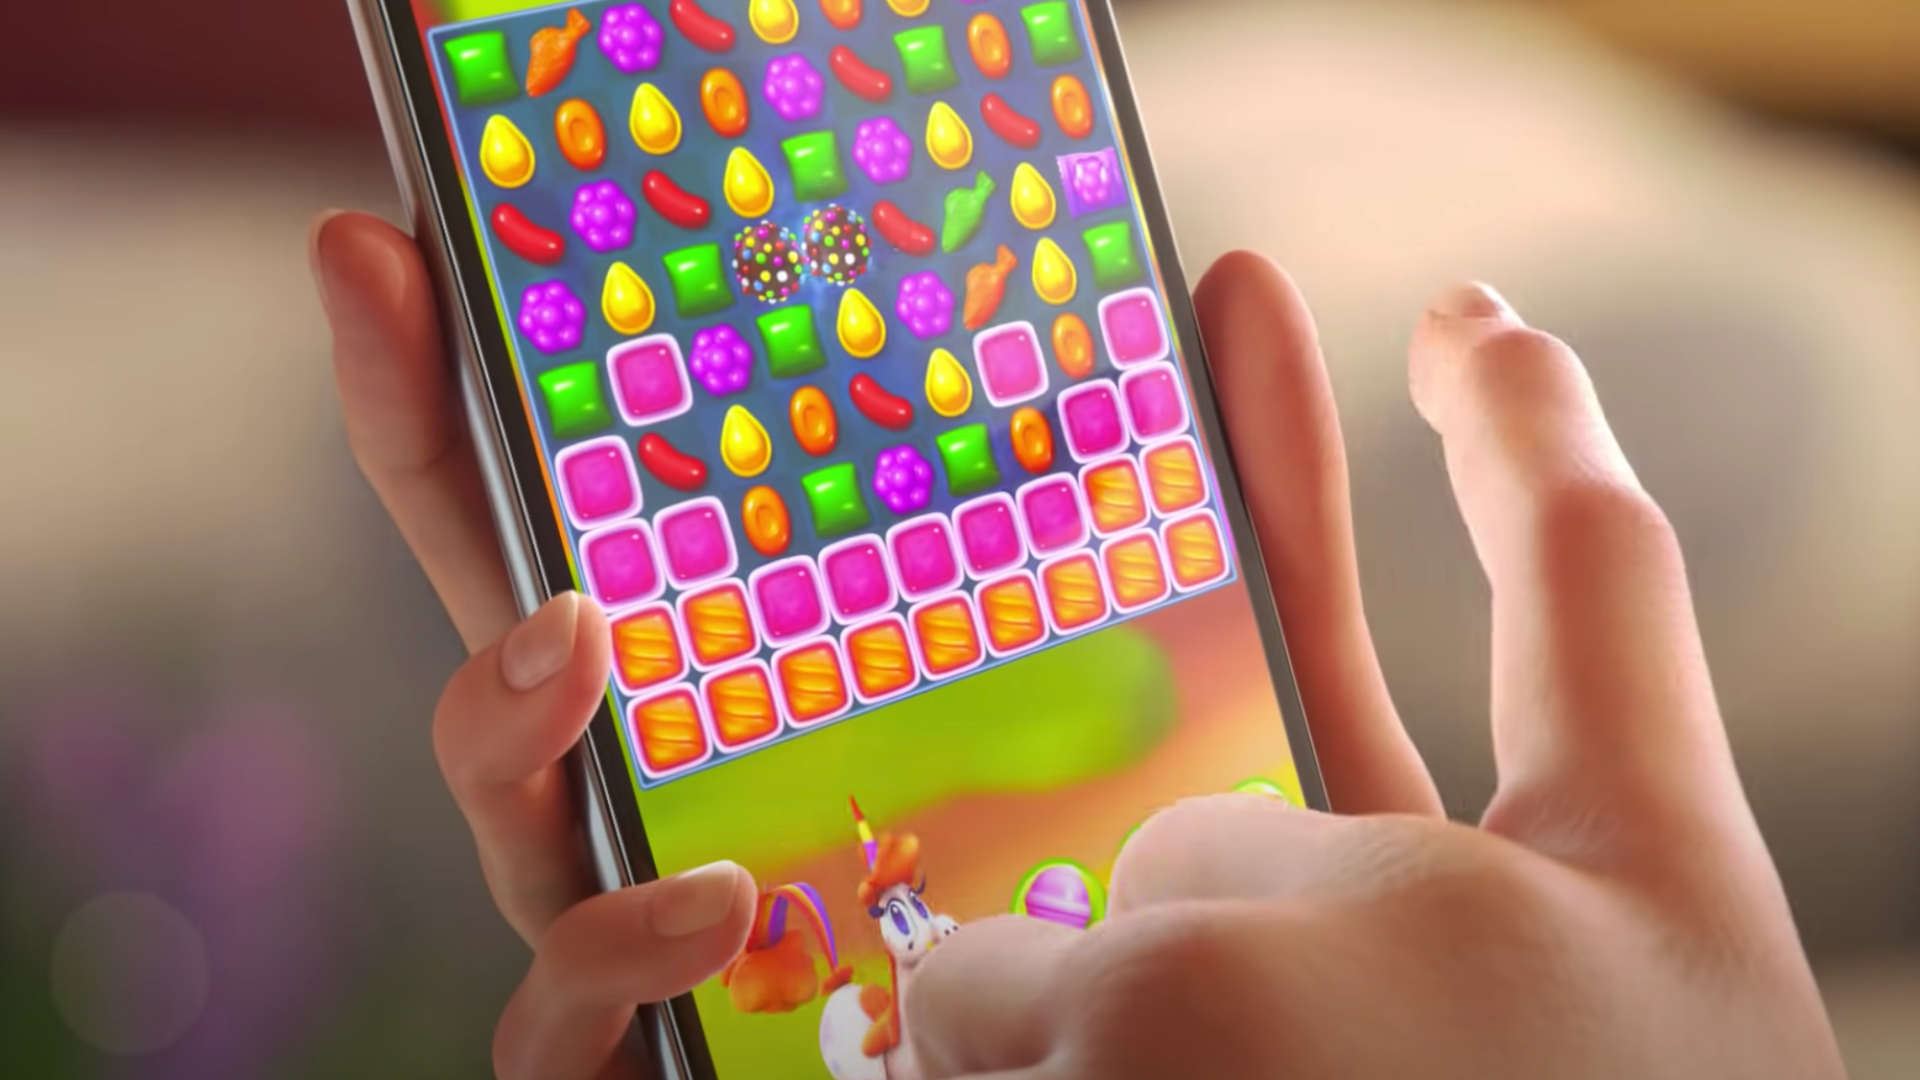 Latest Candy Crush game hits 10M downloads - Mobile World Live